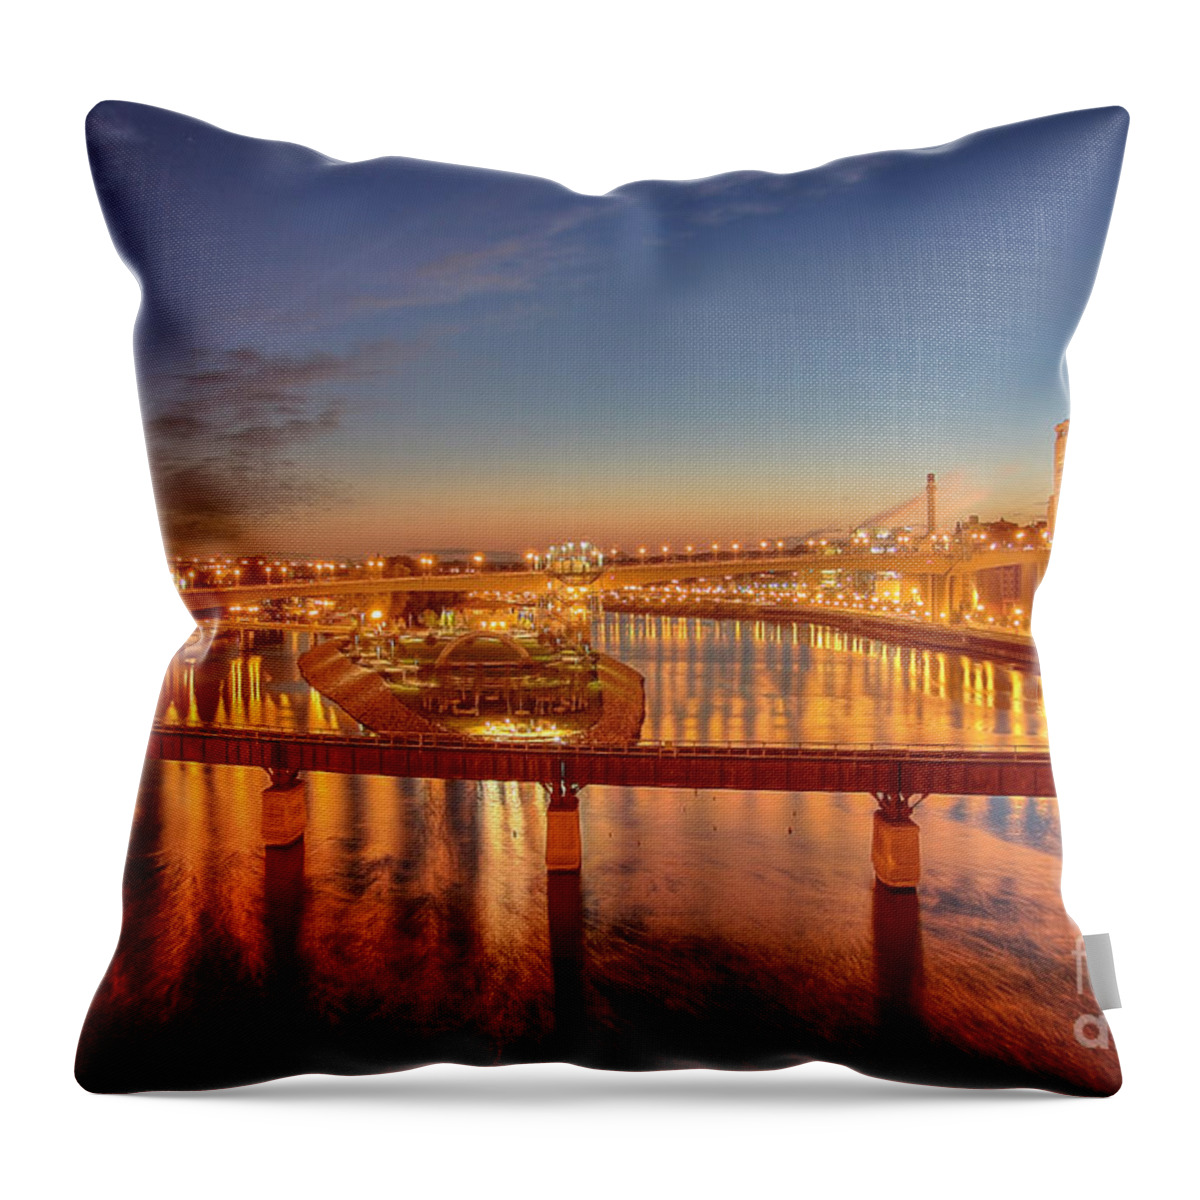 Architecture Throw Pillow featuring the photograph Saint Paul Skyline At Night by Wayne Moran